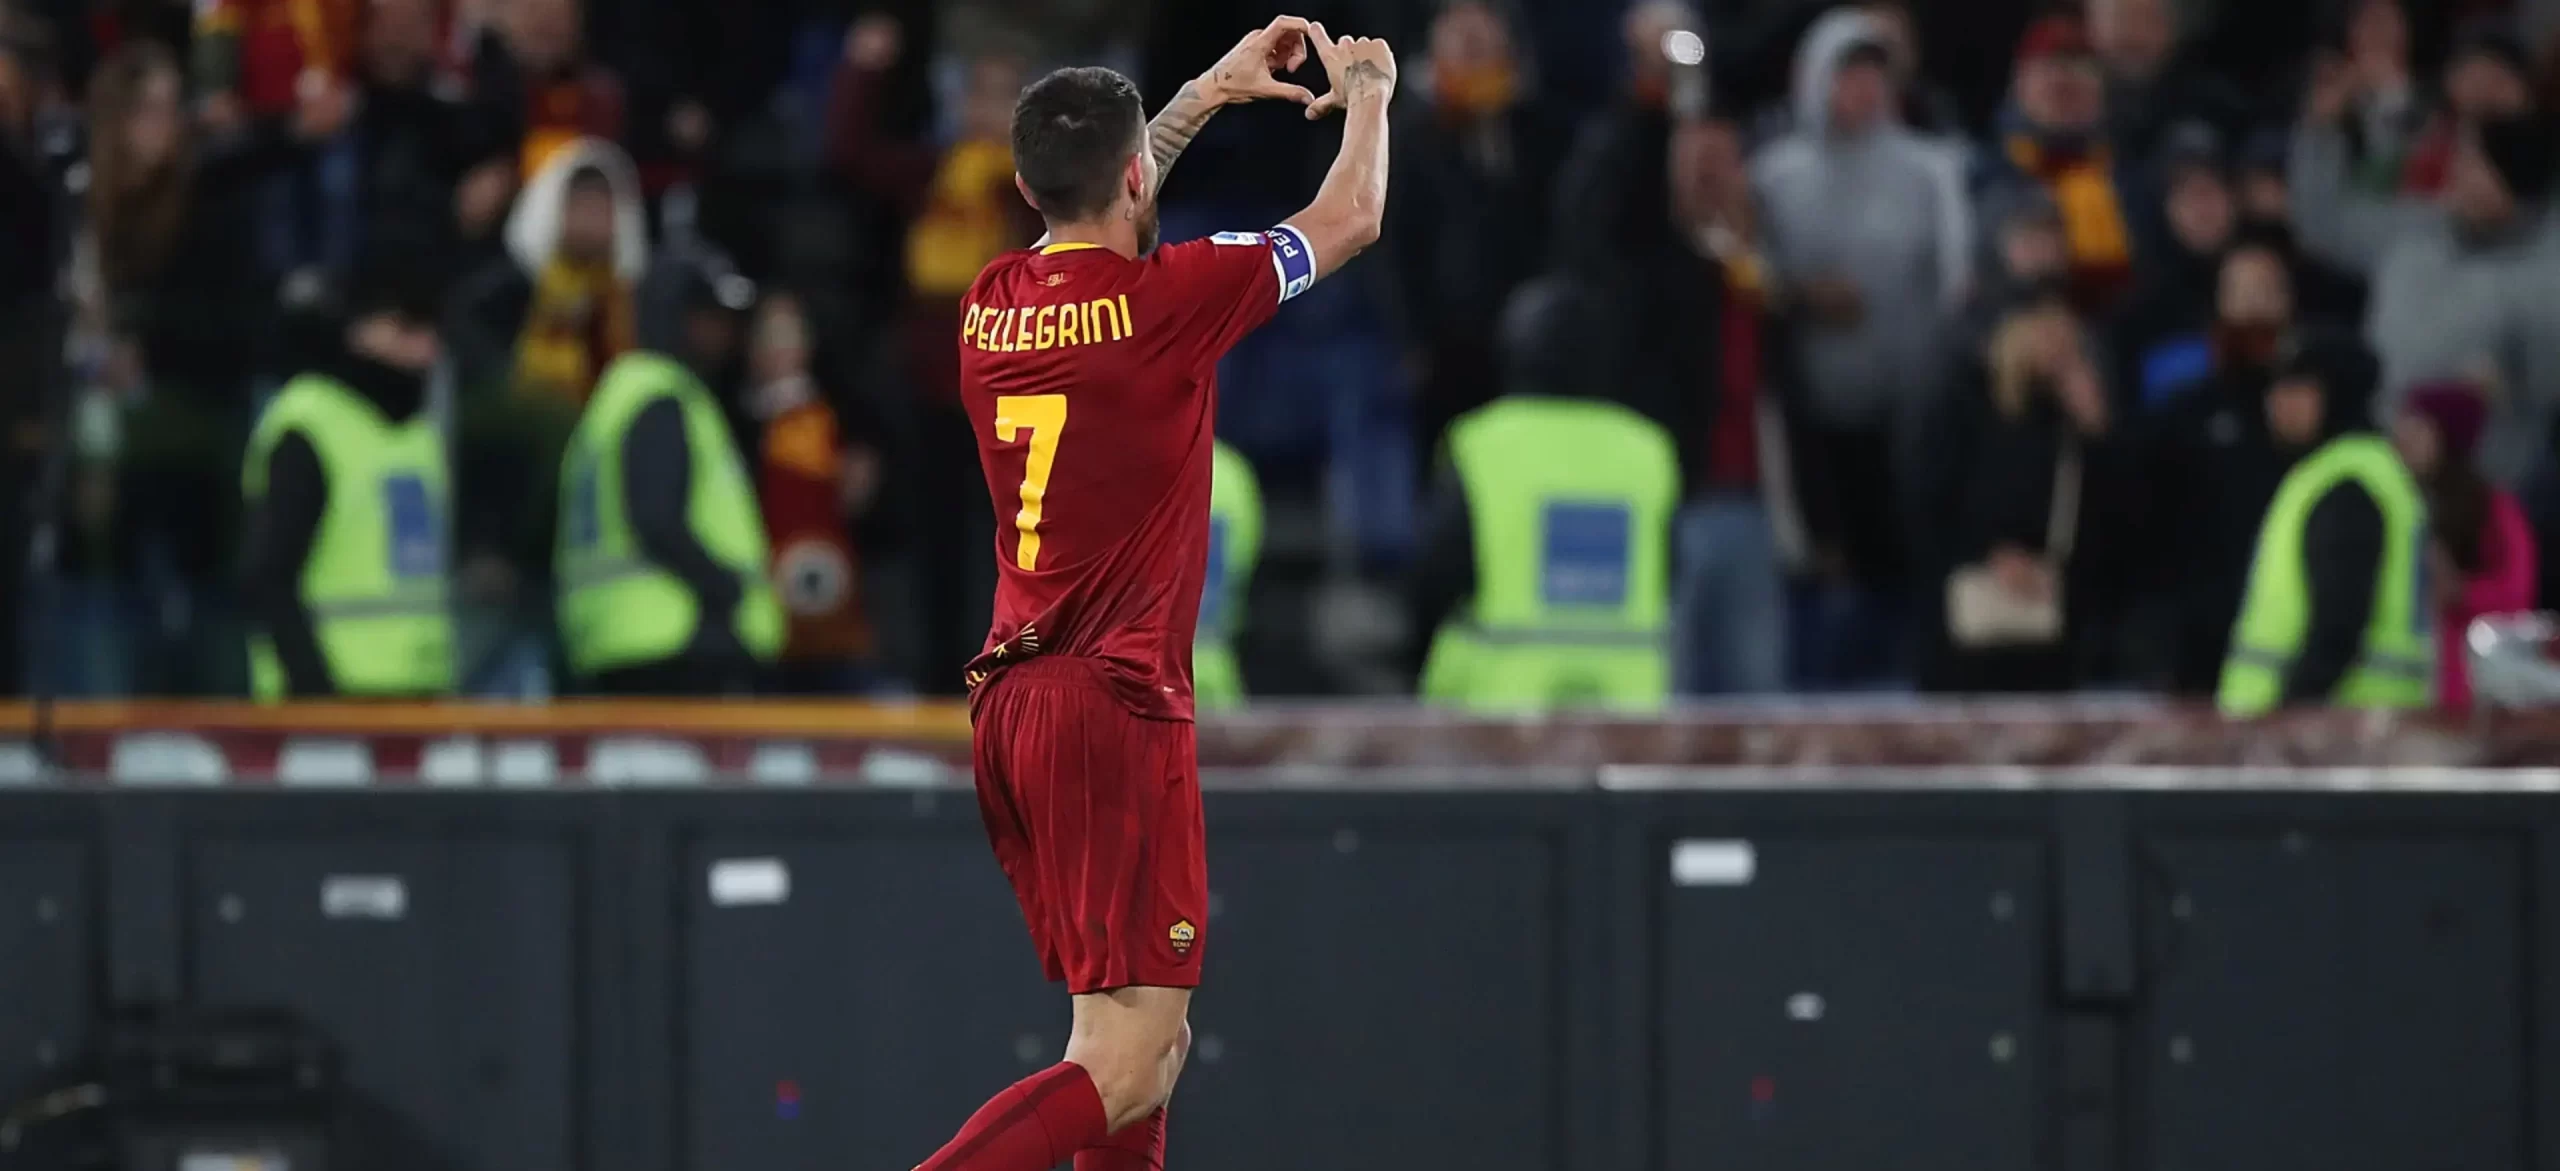 Lorenzo Pellegrini inspired a comfortable and well-deserved 3-0 win for Roma over Udinese at the Stadio Olimpico as they took another positive step towards Champions League football next term.